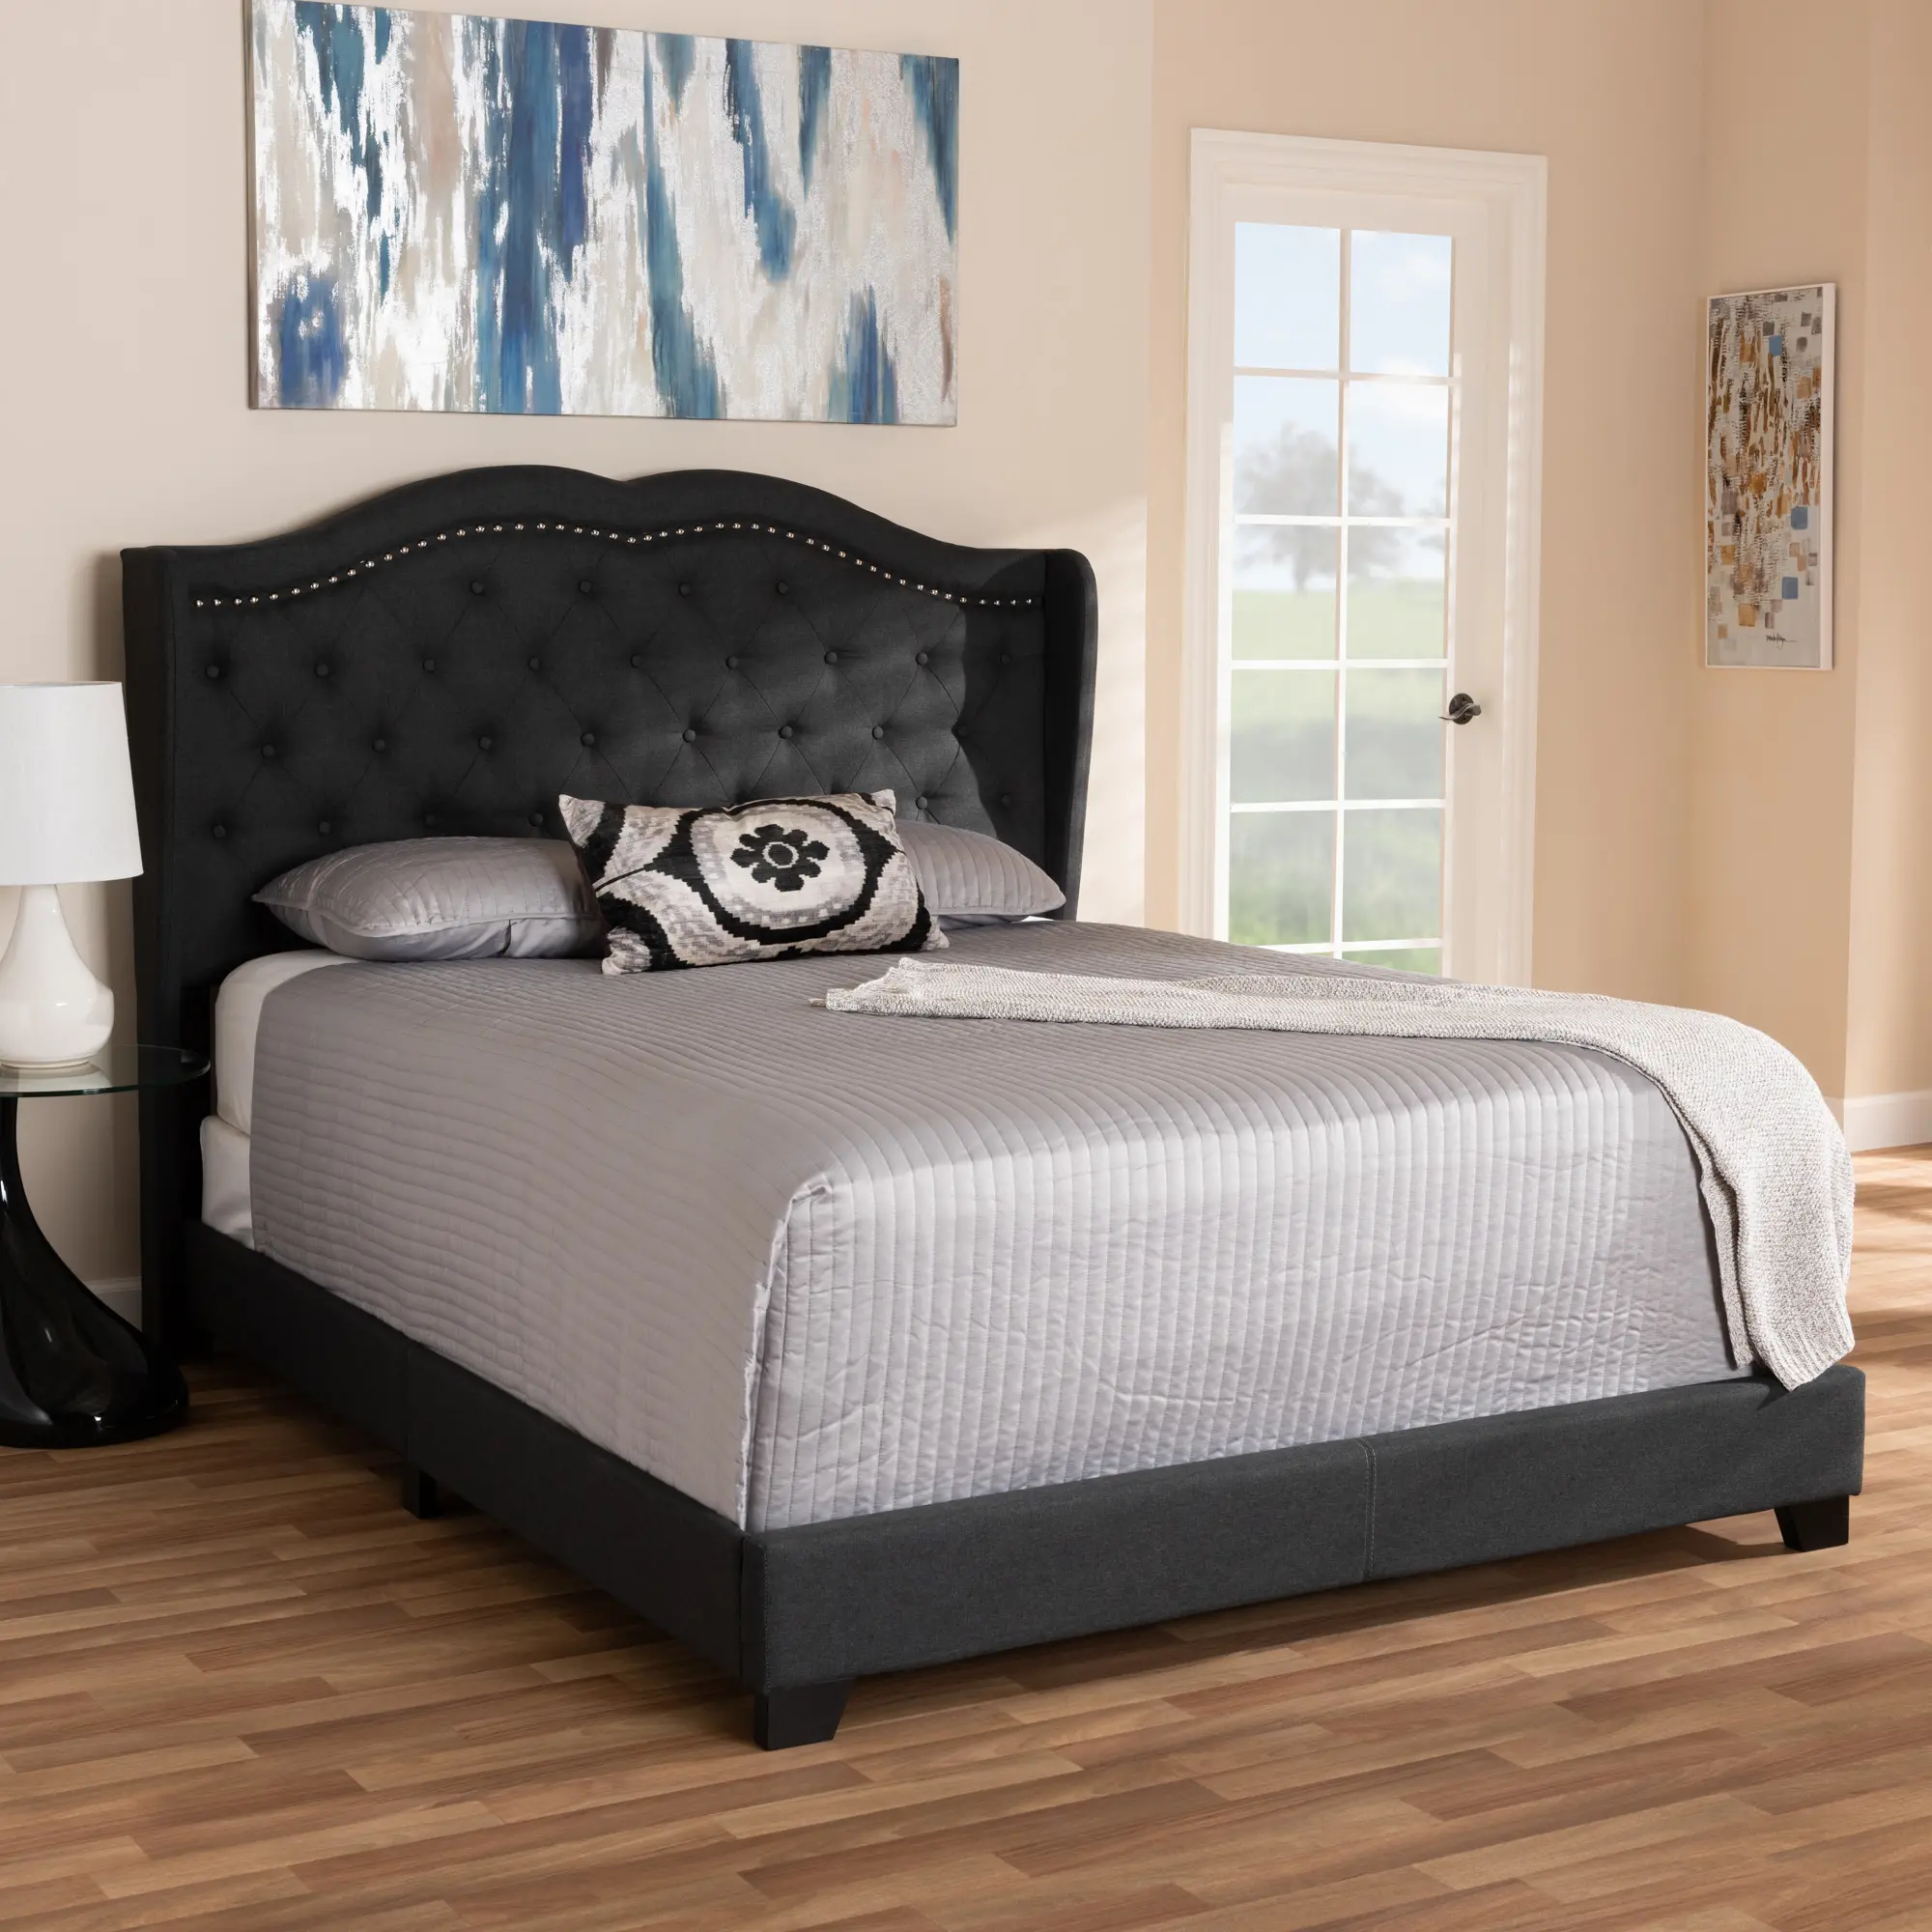 149-8973-RCW Contemporary Charcoal Gray Upholstered King Bed -  sku 149-8973-RCW